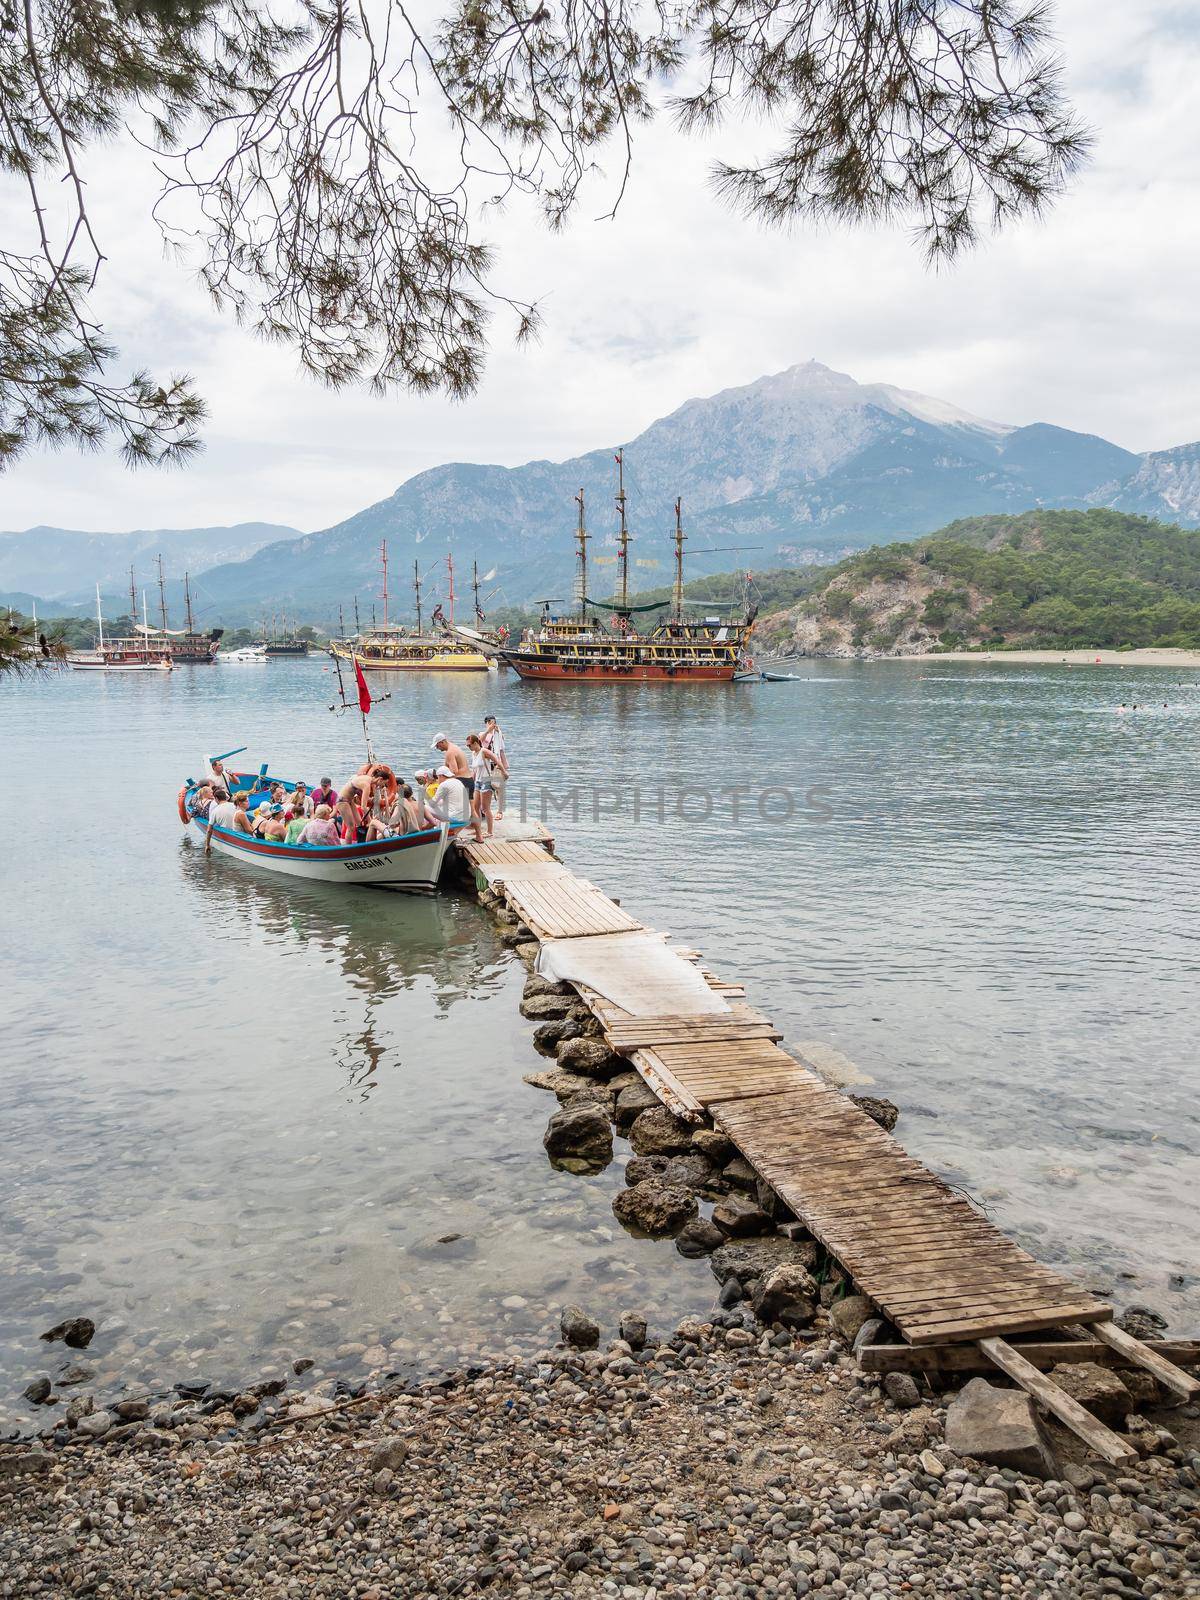 PHASELIS, TURKEY - May 19, 2018. Tourists get into the boat after excursion. Touristic yachts and boats in harbour of ancient ruins of Phaselis city. by aksenovko